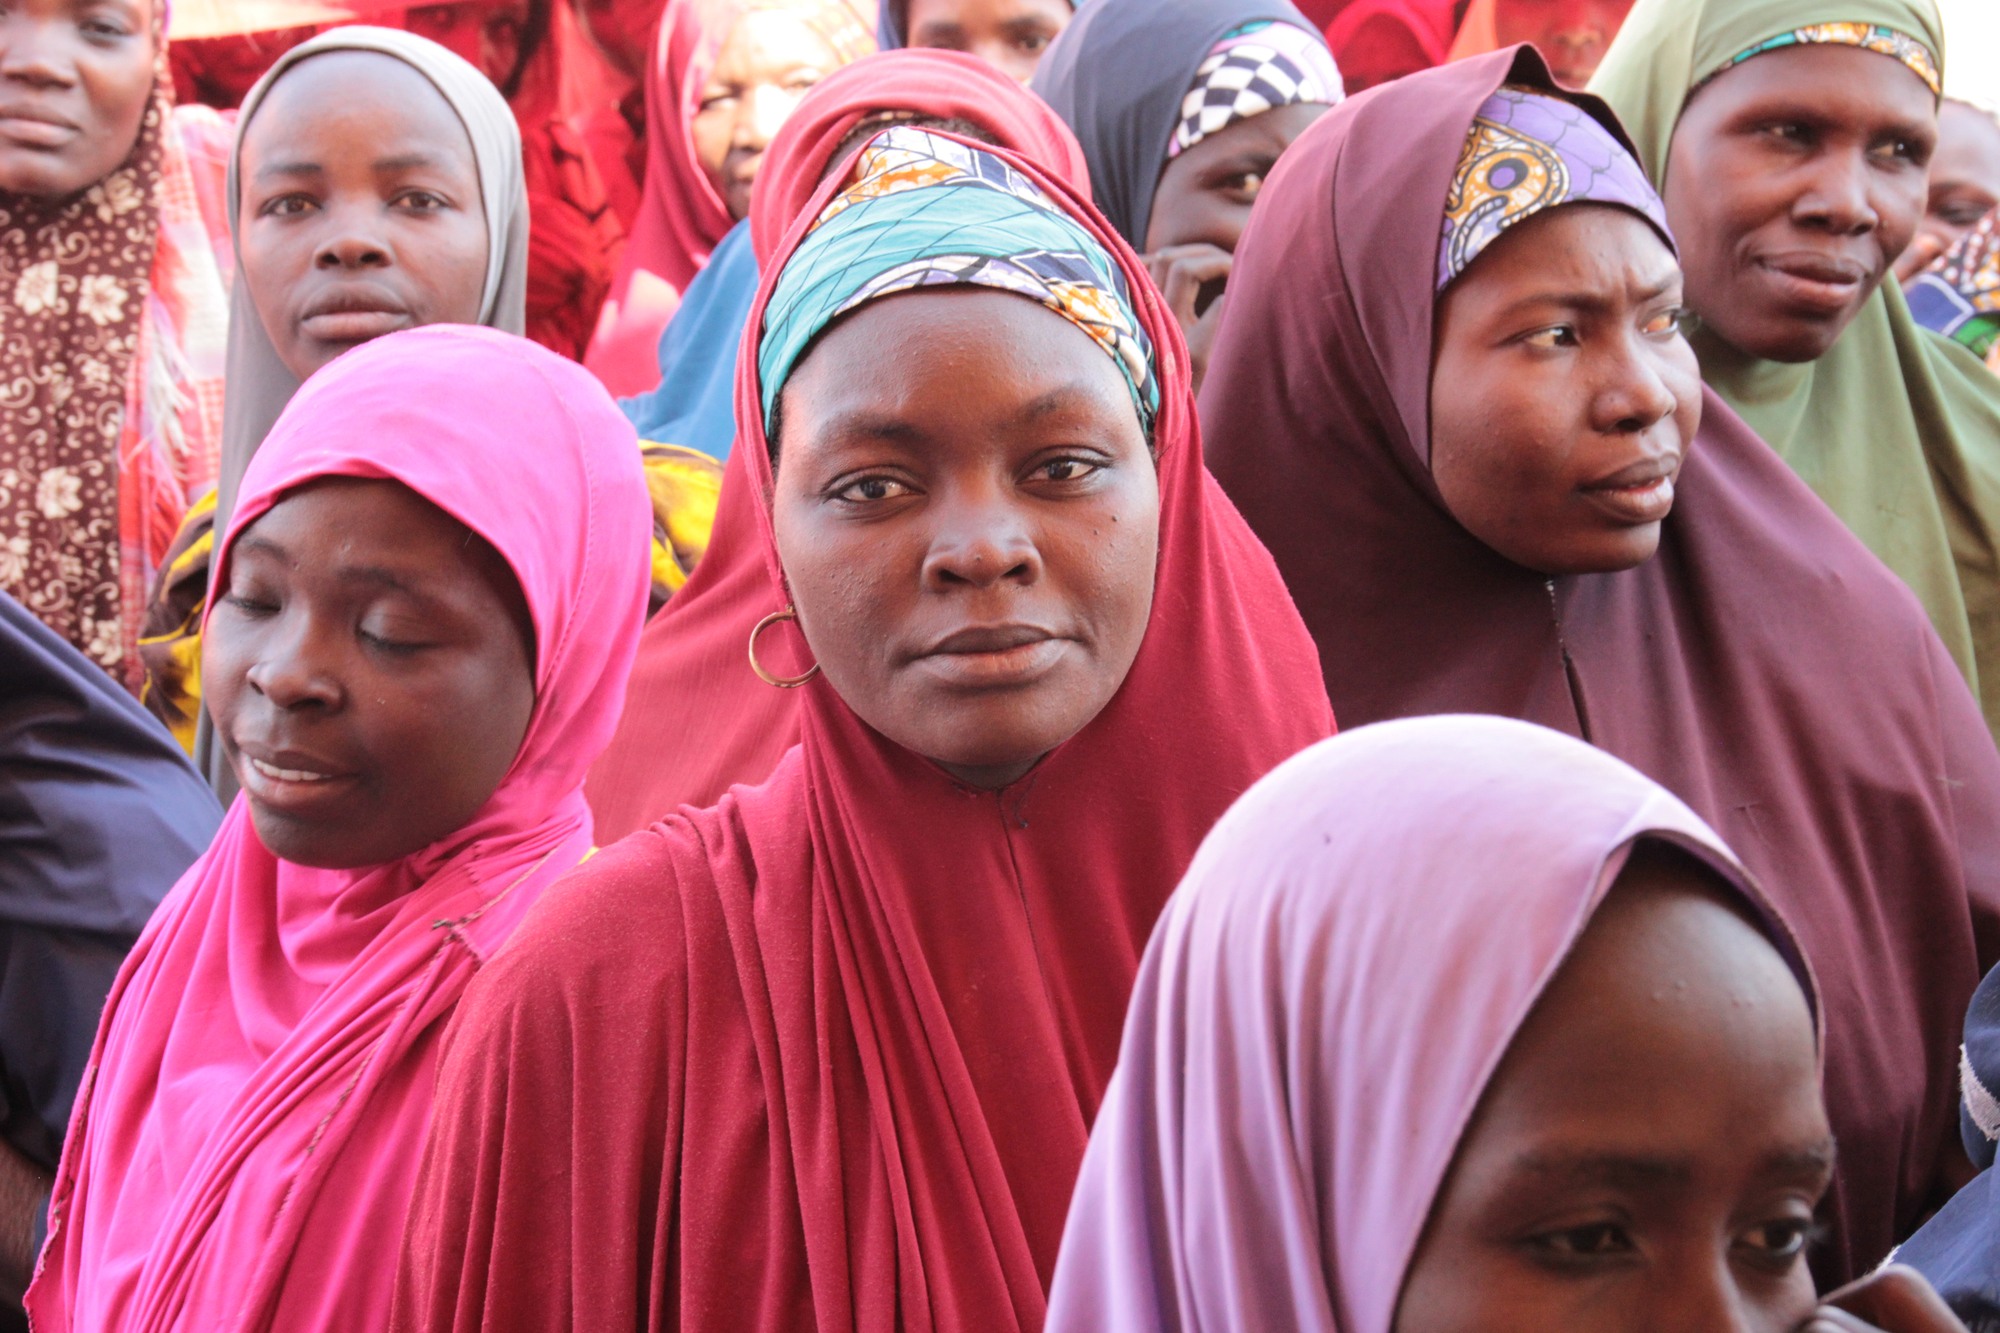 Women at a food distribution center in Nigeria, all wearing brightly colored hijabs on their heads